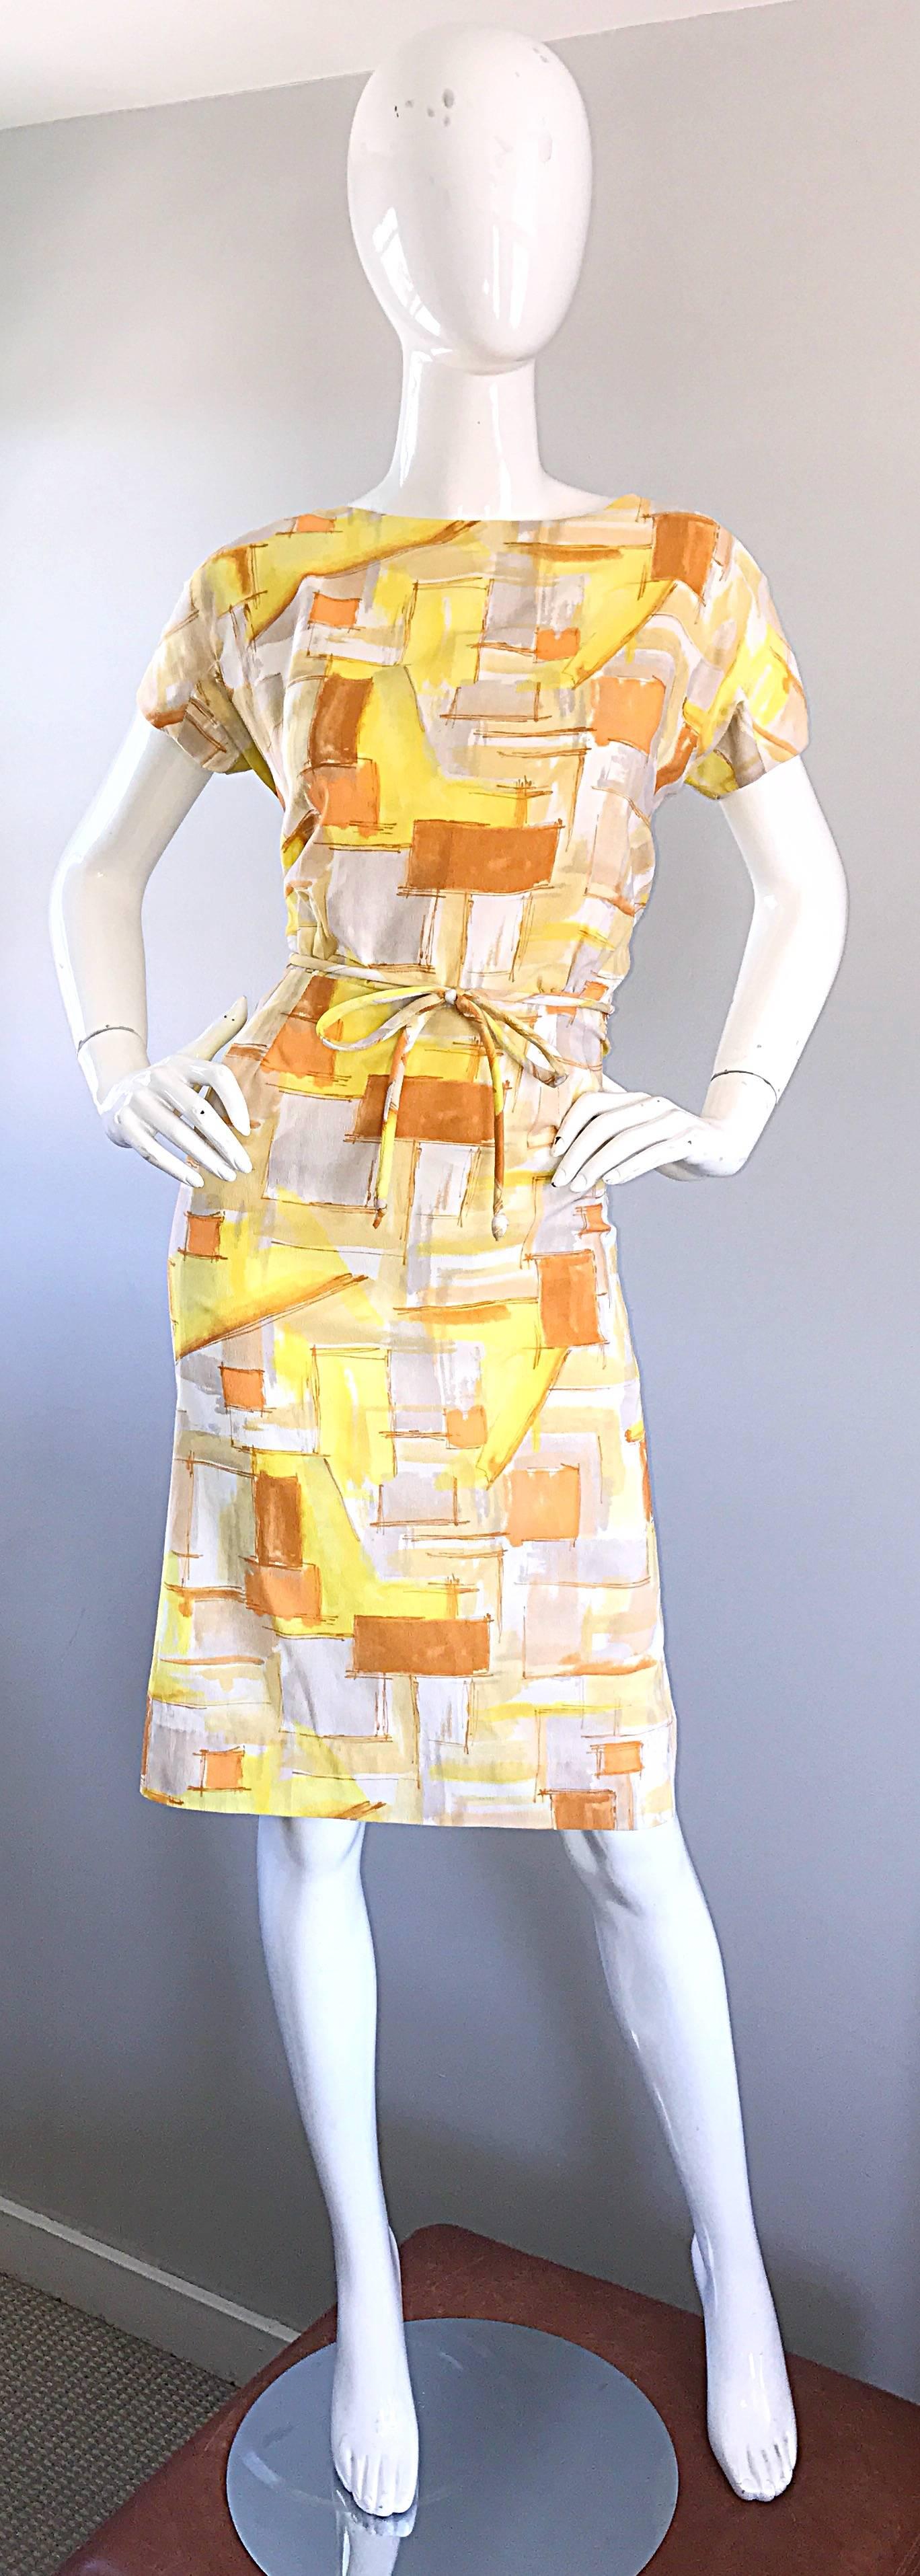 Chic early 1960s yellow, orange, burnt orange and white geometric abstract belted short sleeve day dress! Flattering fit, with a detachable belt to form a waistline. Hidden metal zipper up th eback with hook-and-eye closure. Could easily be dressed